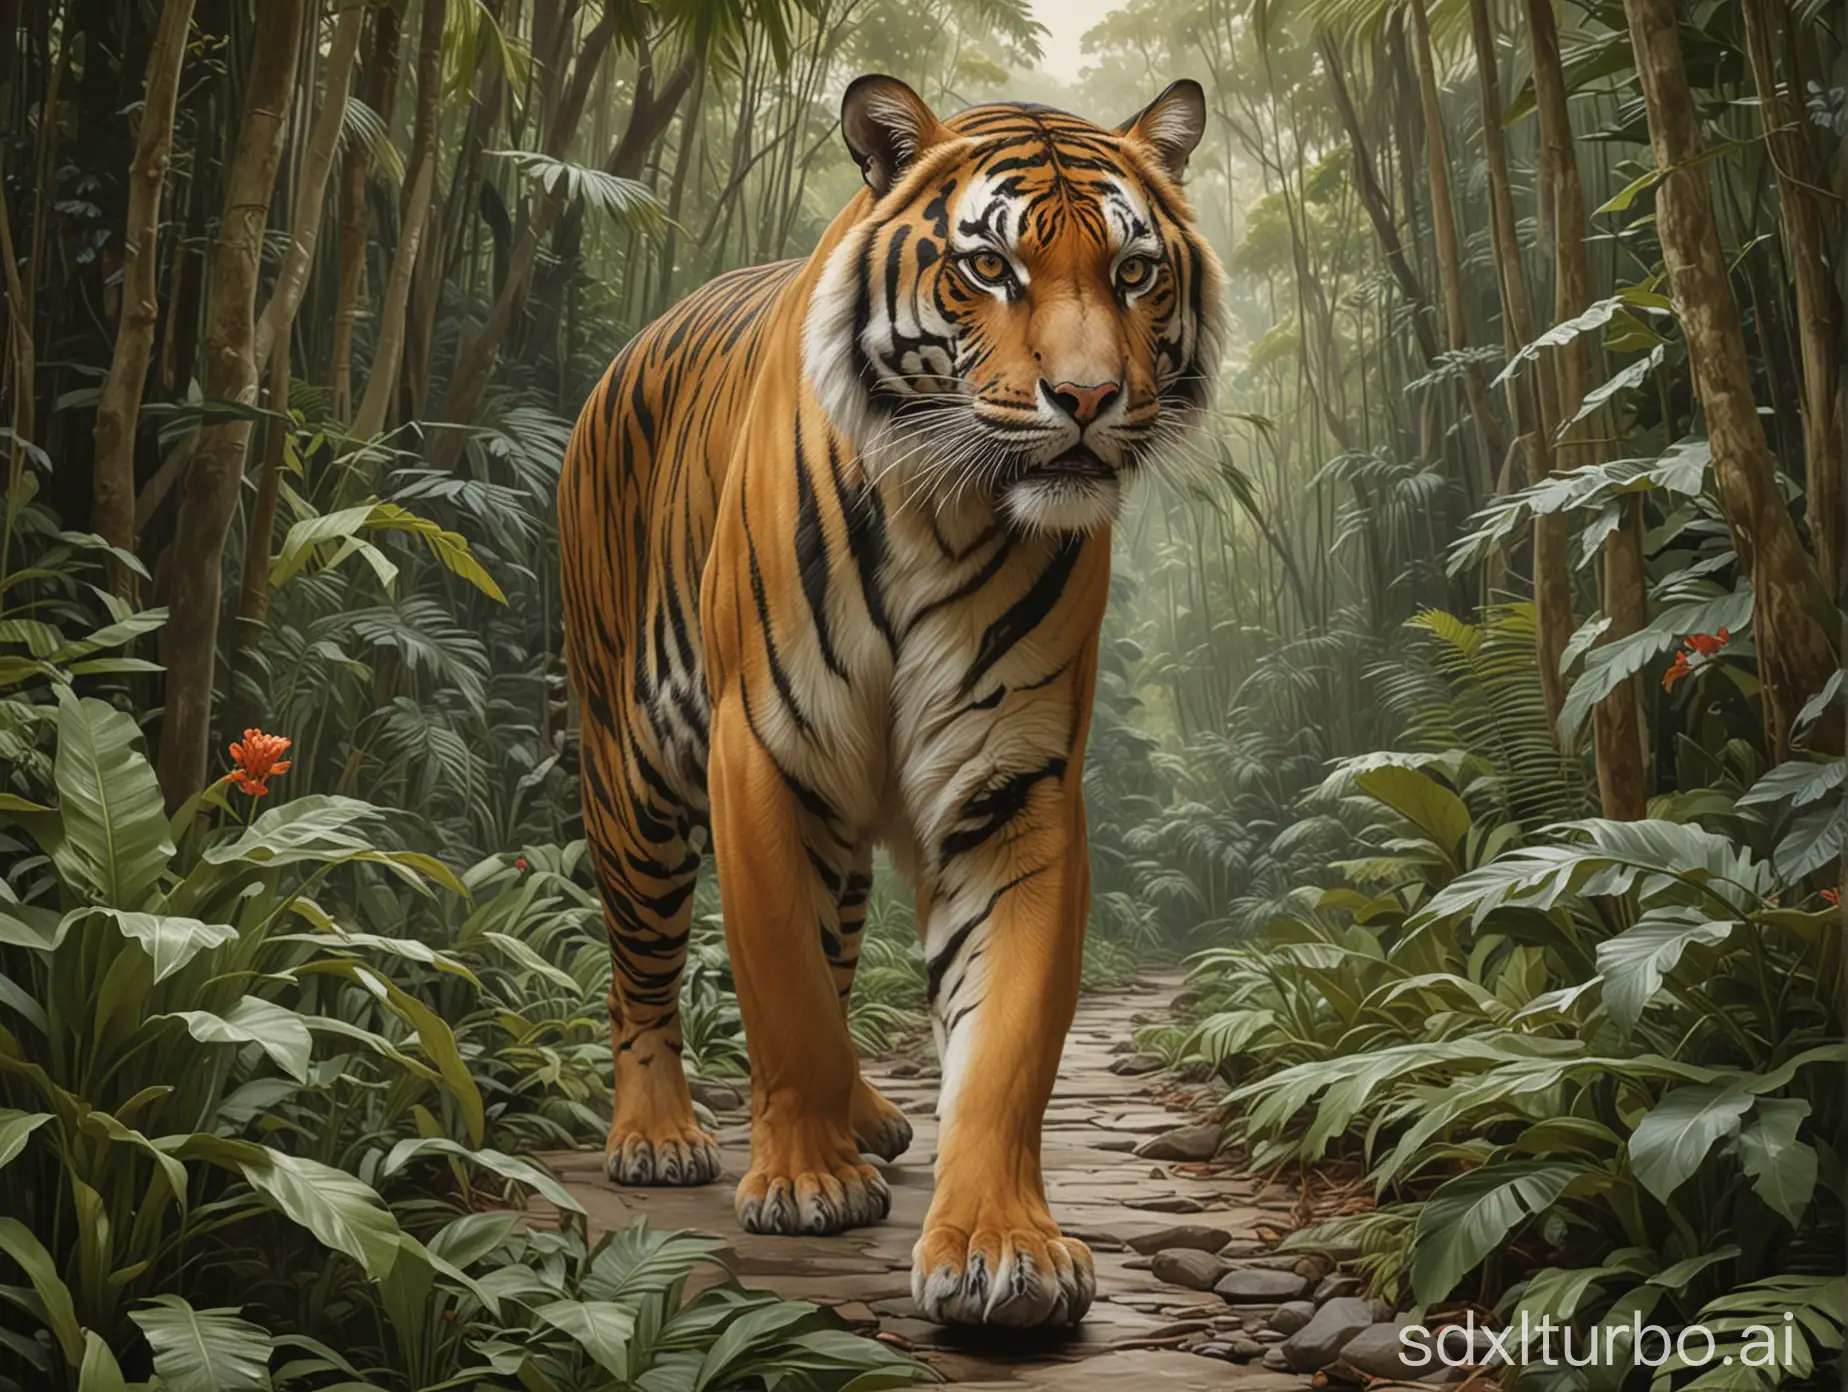 Majestic-Tiger-Strolling-Through-Indonesian-Rainforest-Inspired-by-Leyendeckers-Painting